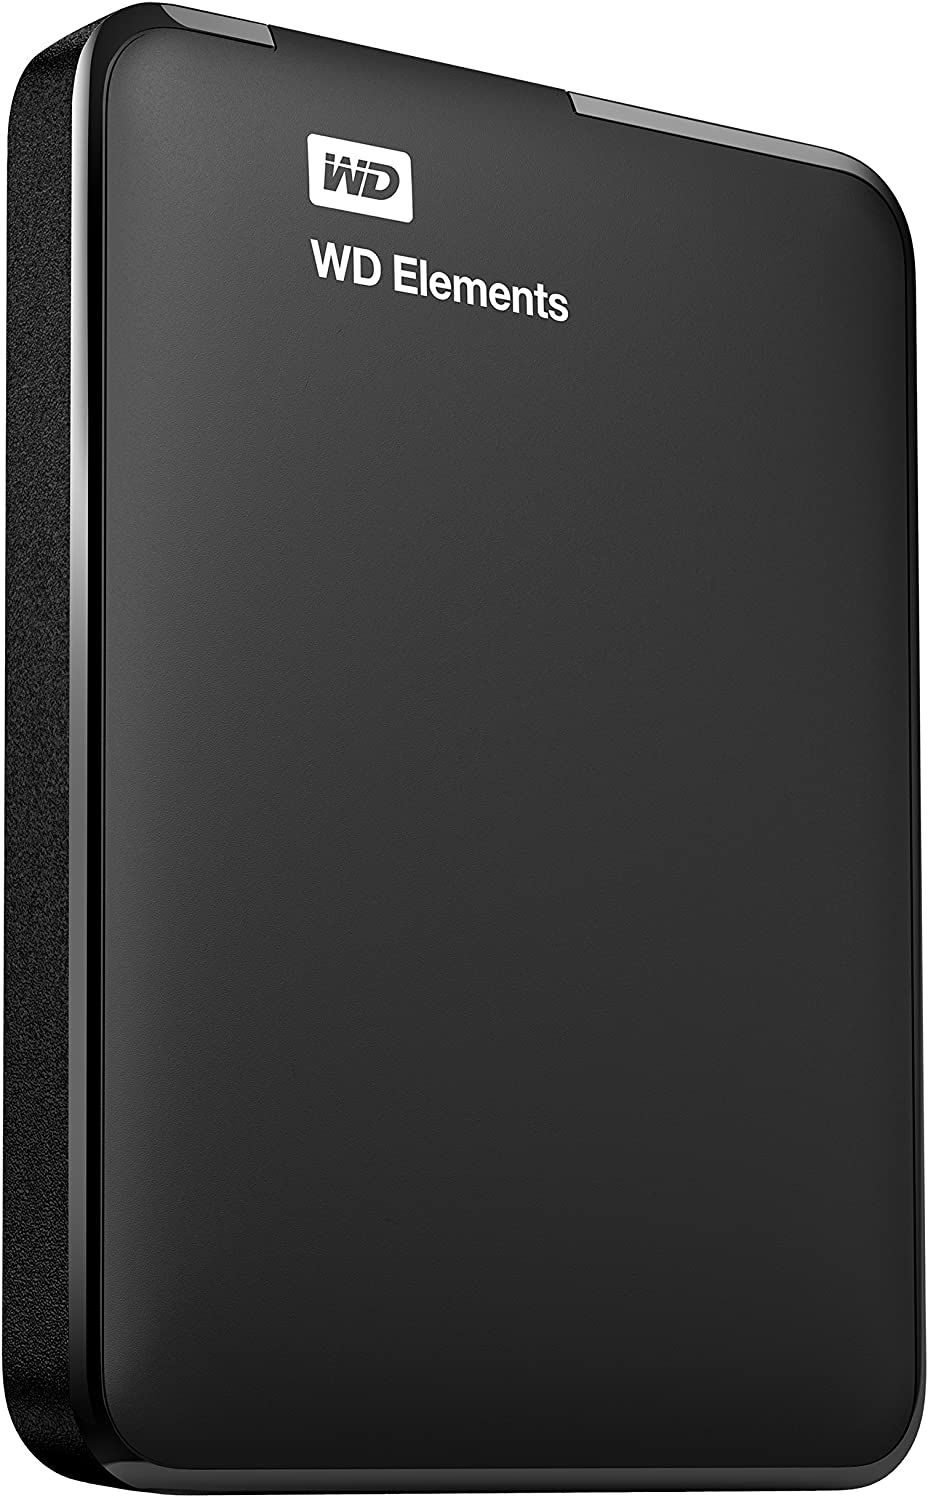 WD Elements 2TB side view